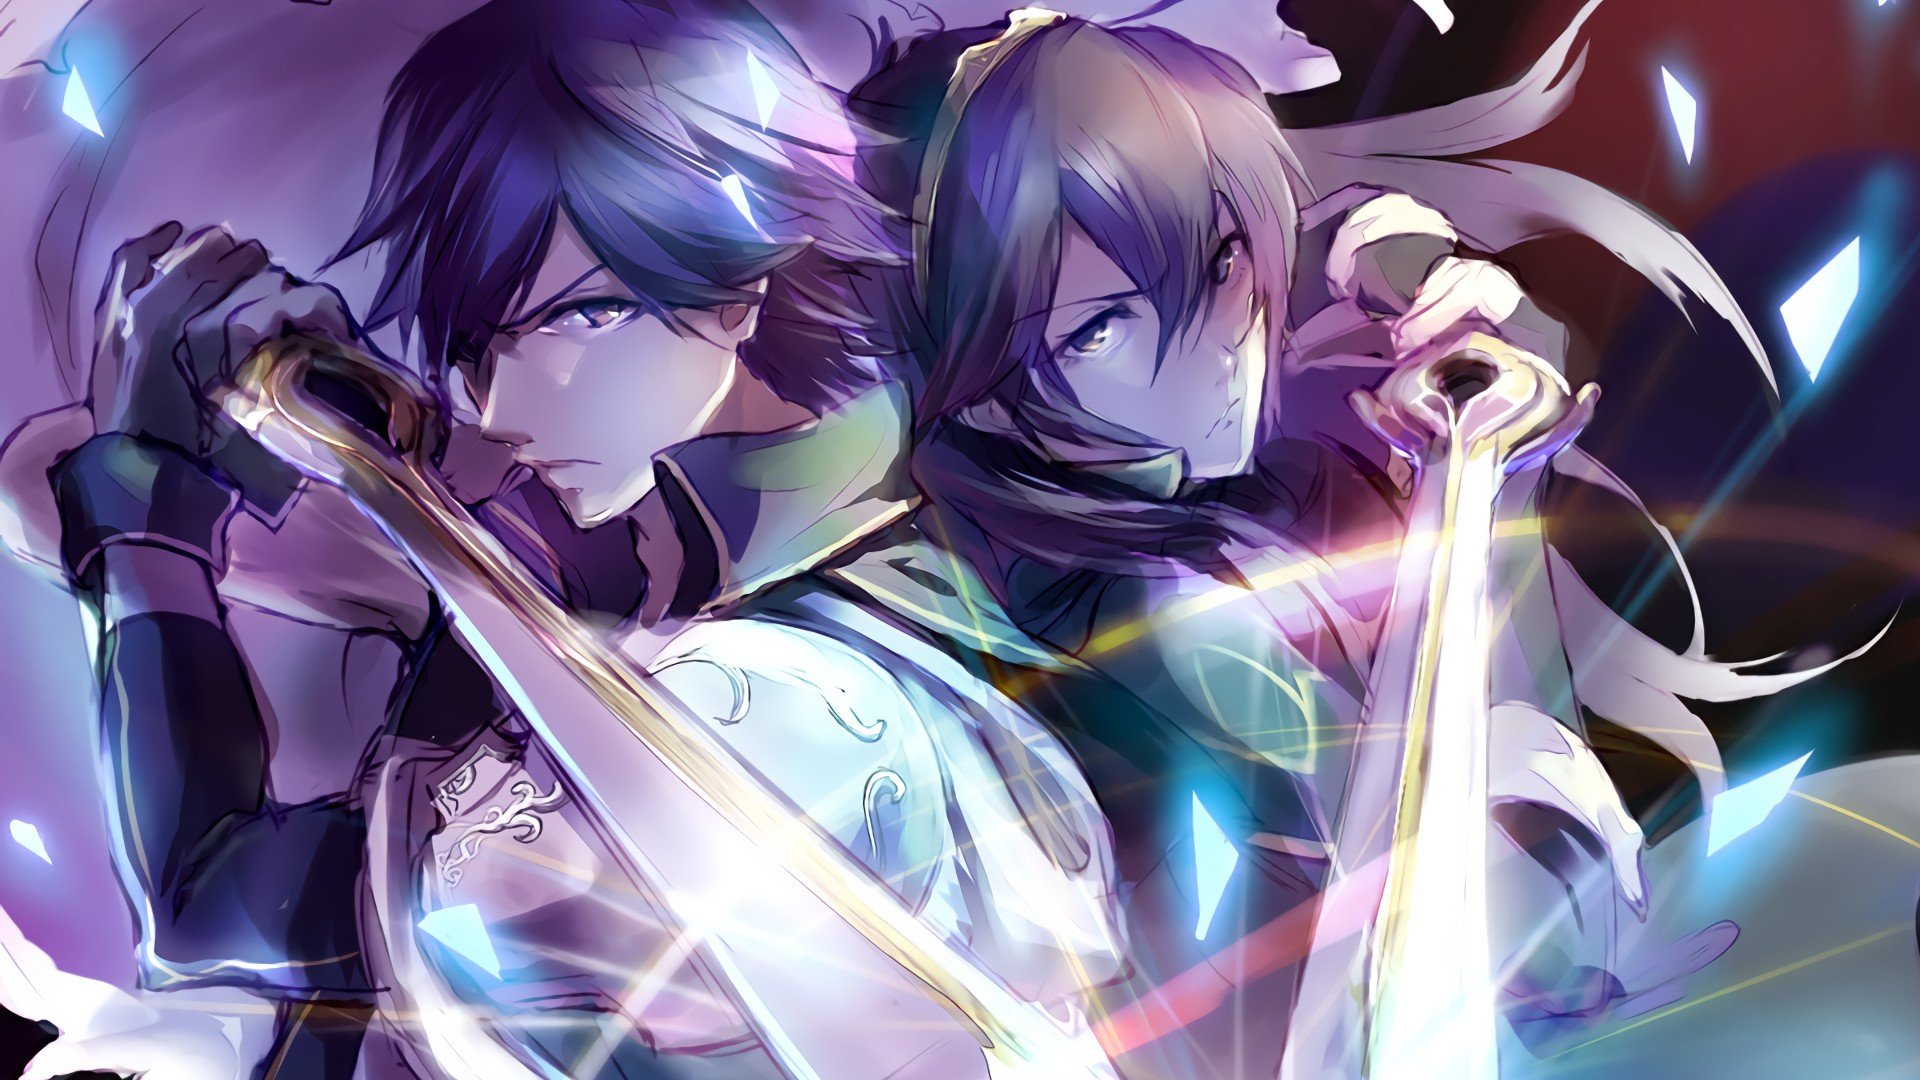 Wallpaper Chrom and Lucina with sword from Fire Emblem Awakening. 